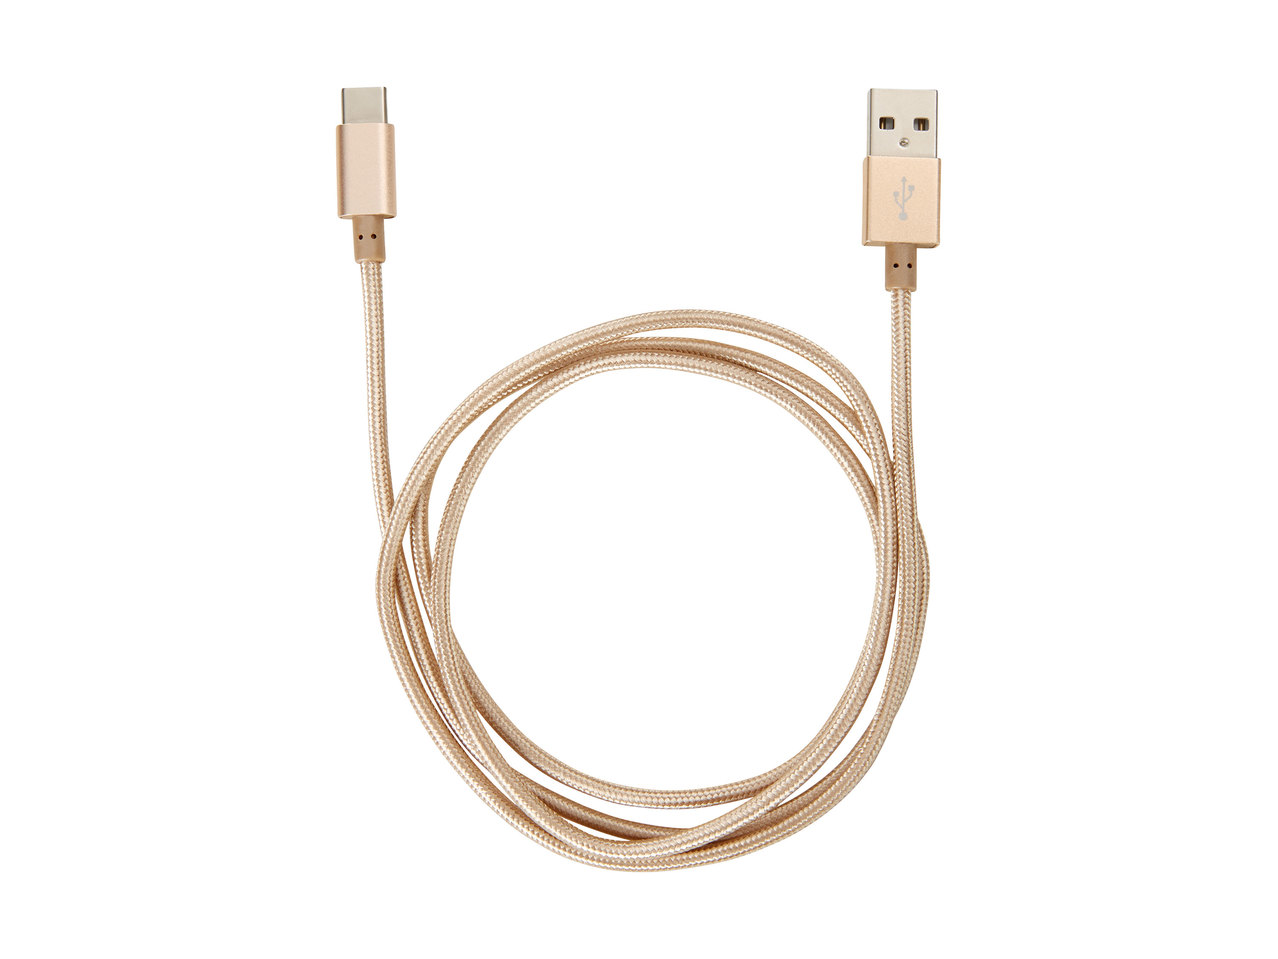 Silvercrest Charging and Data Cable1